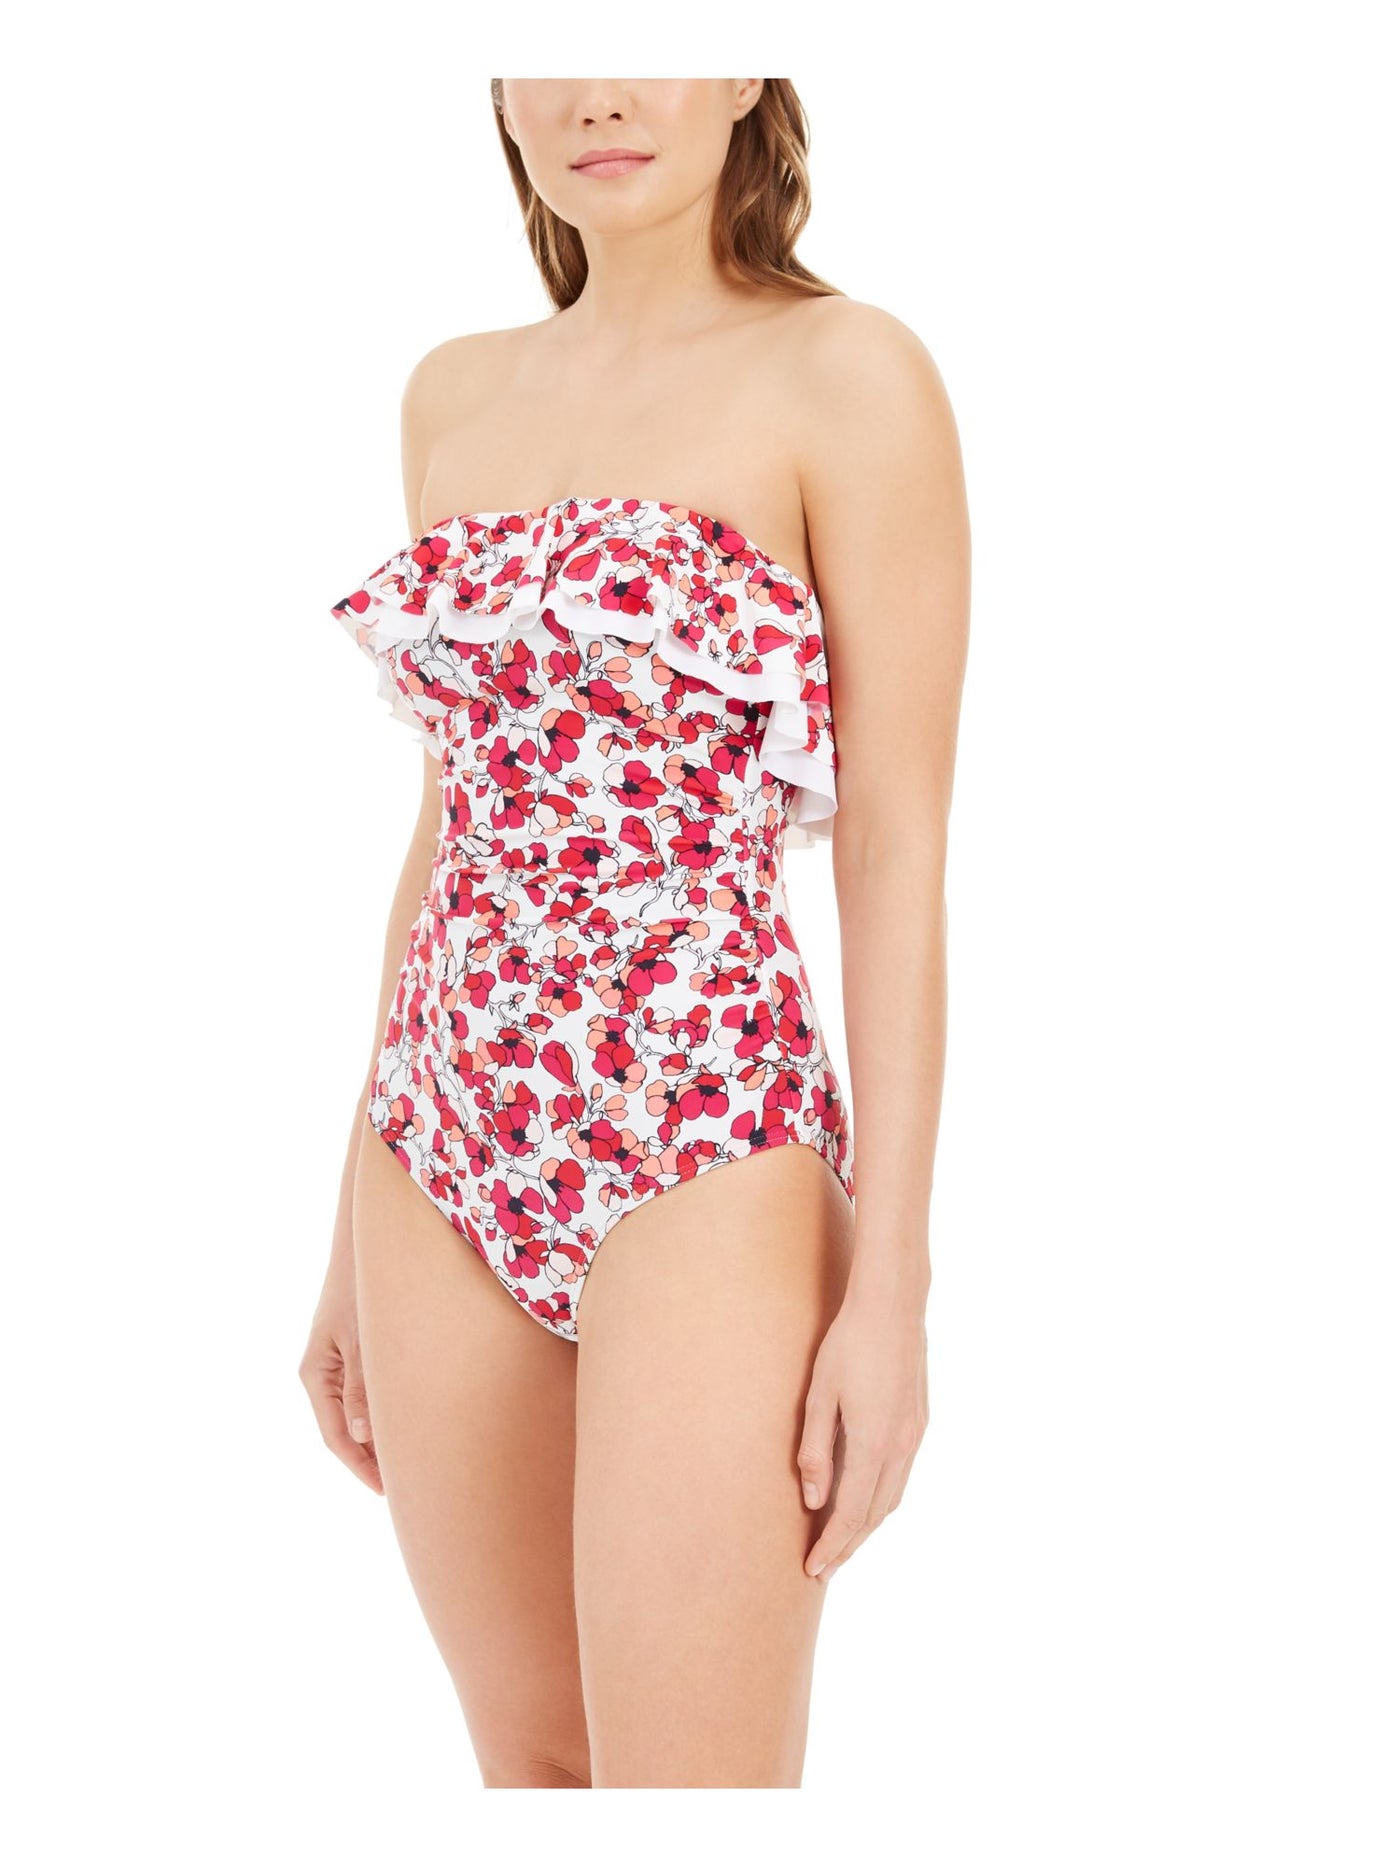 TOMMY HILFIGER Women's White Floral Removable Strap Removable Cups Ruffled Bandeau One Piece Swimsuit 12